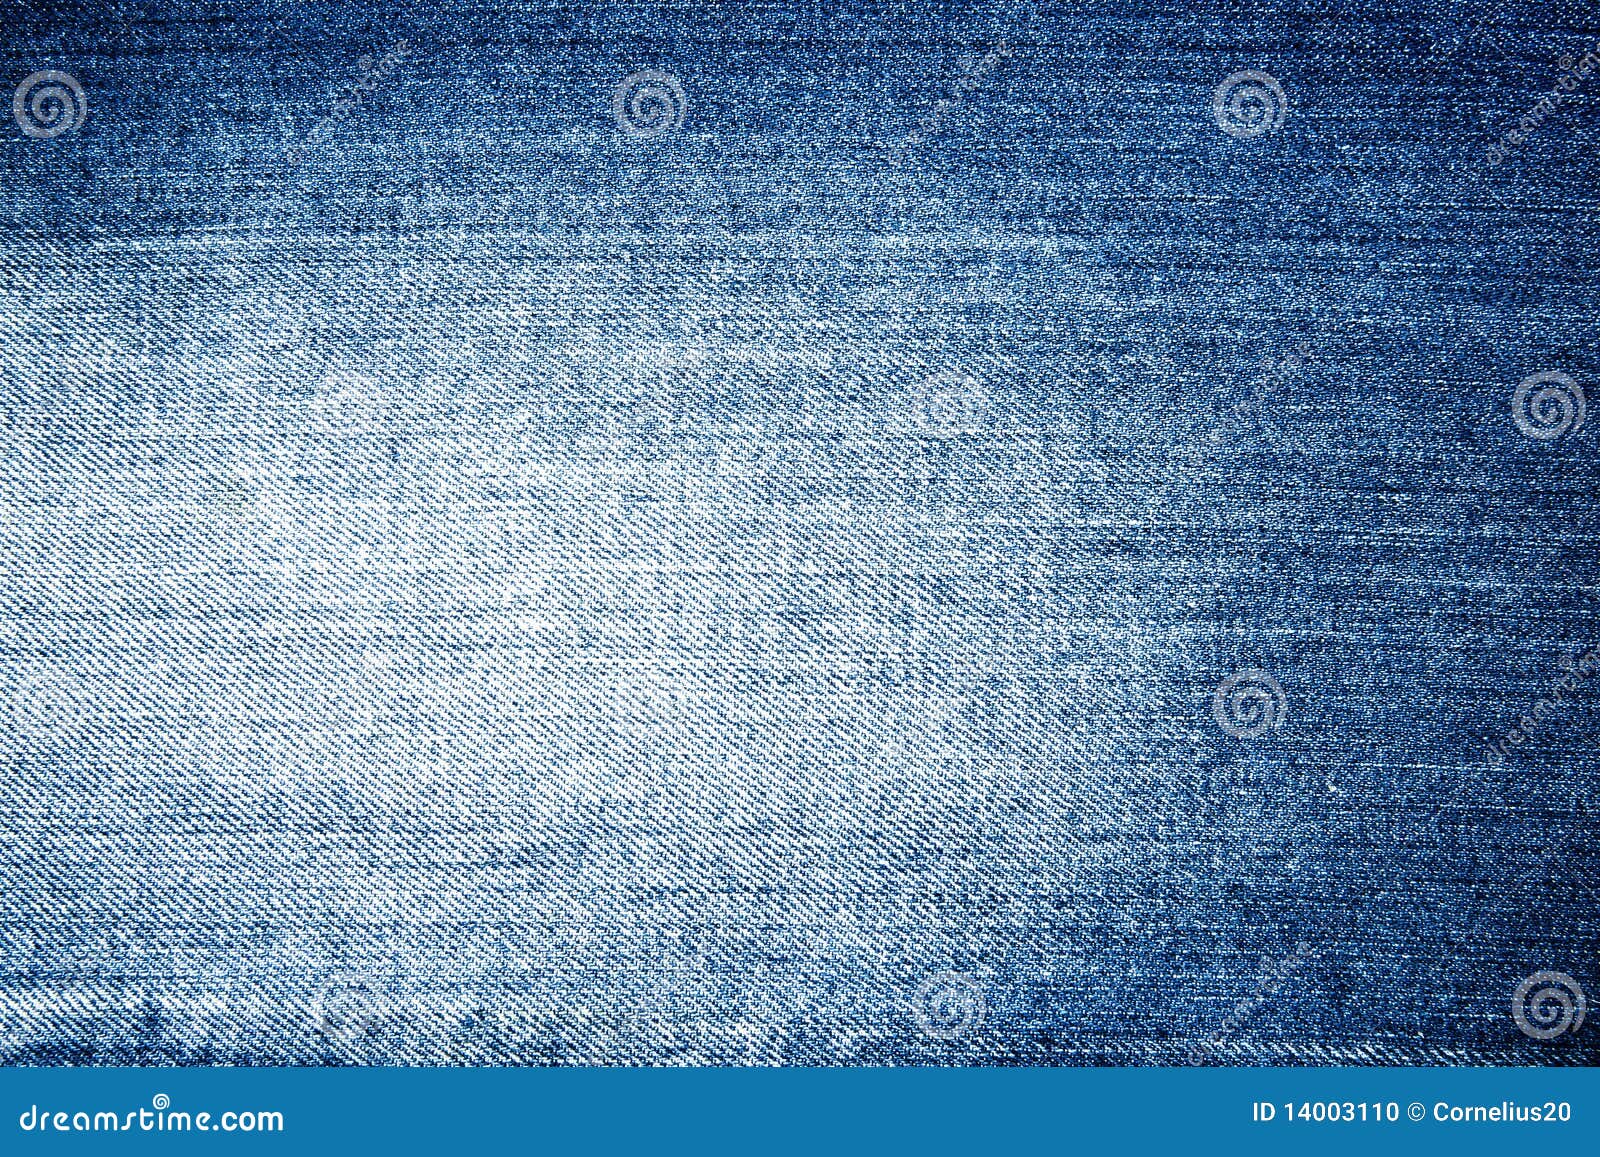 Texture blue jeans stock photo. Image of cotton, abstract - 14003110